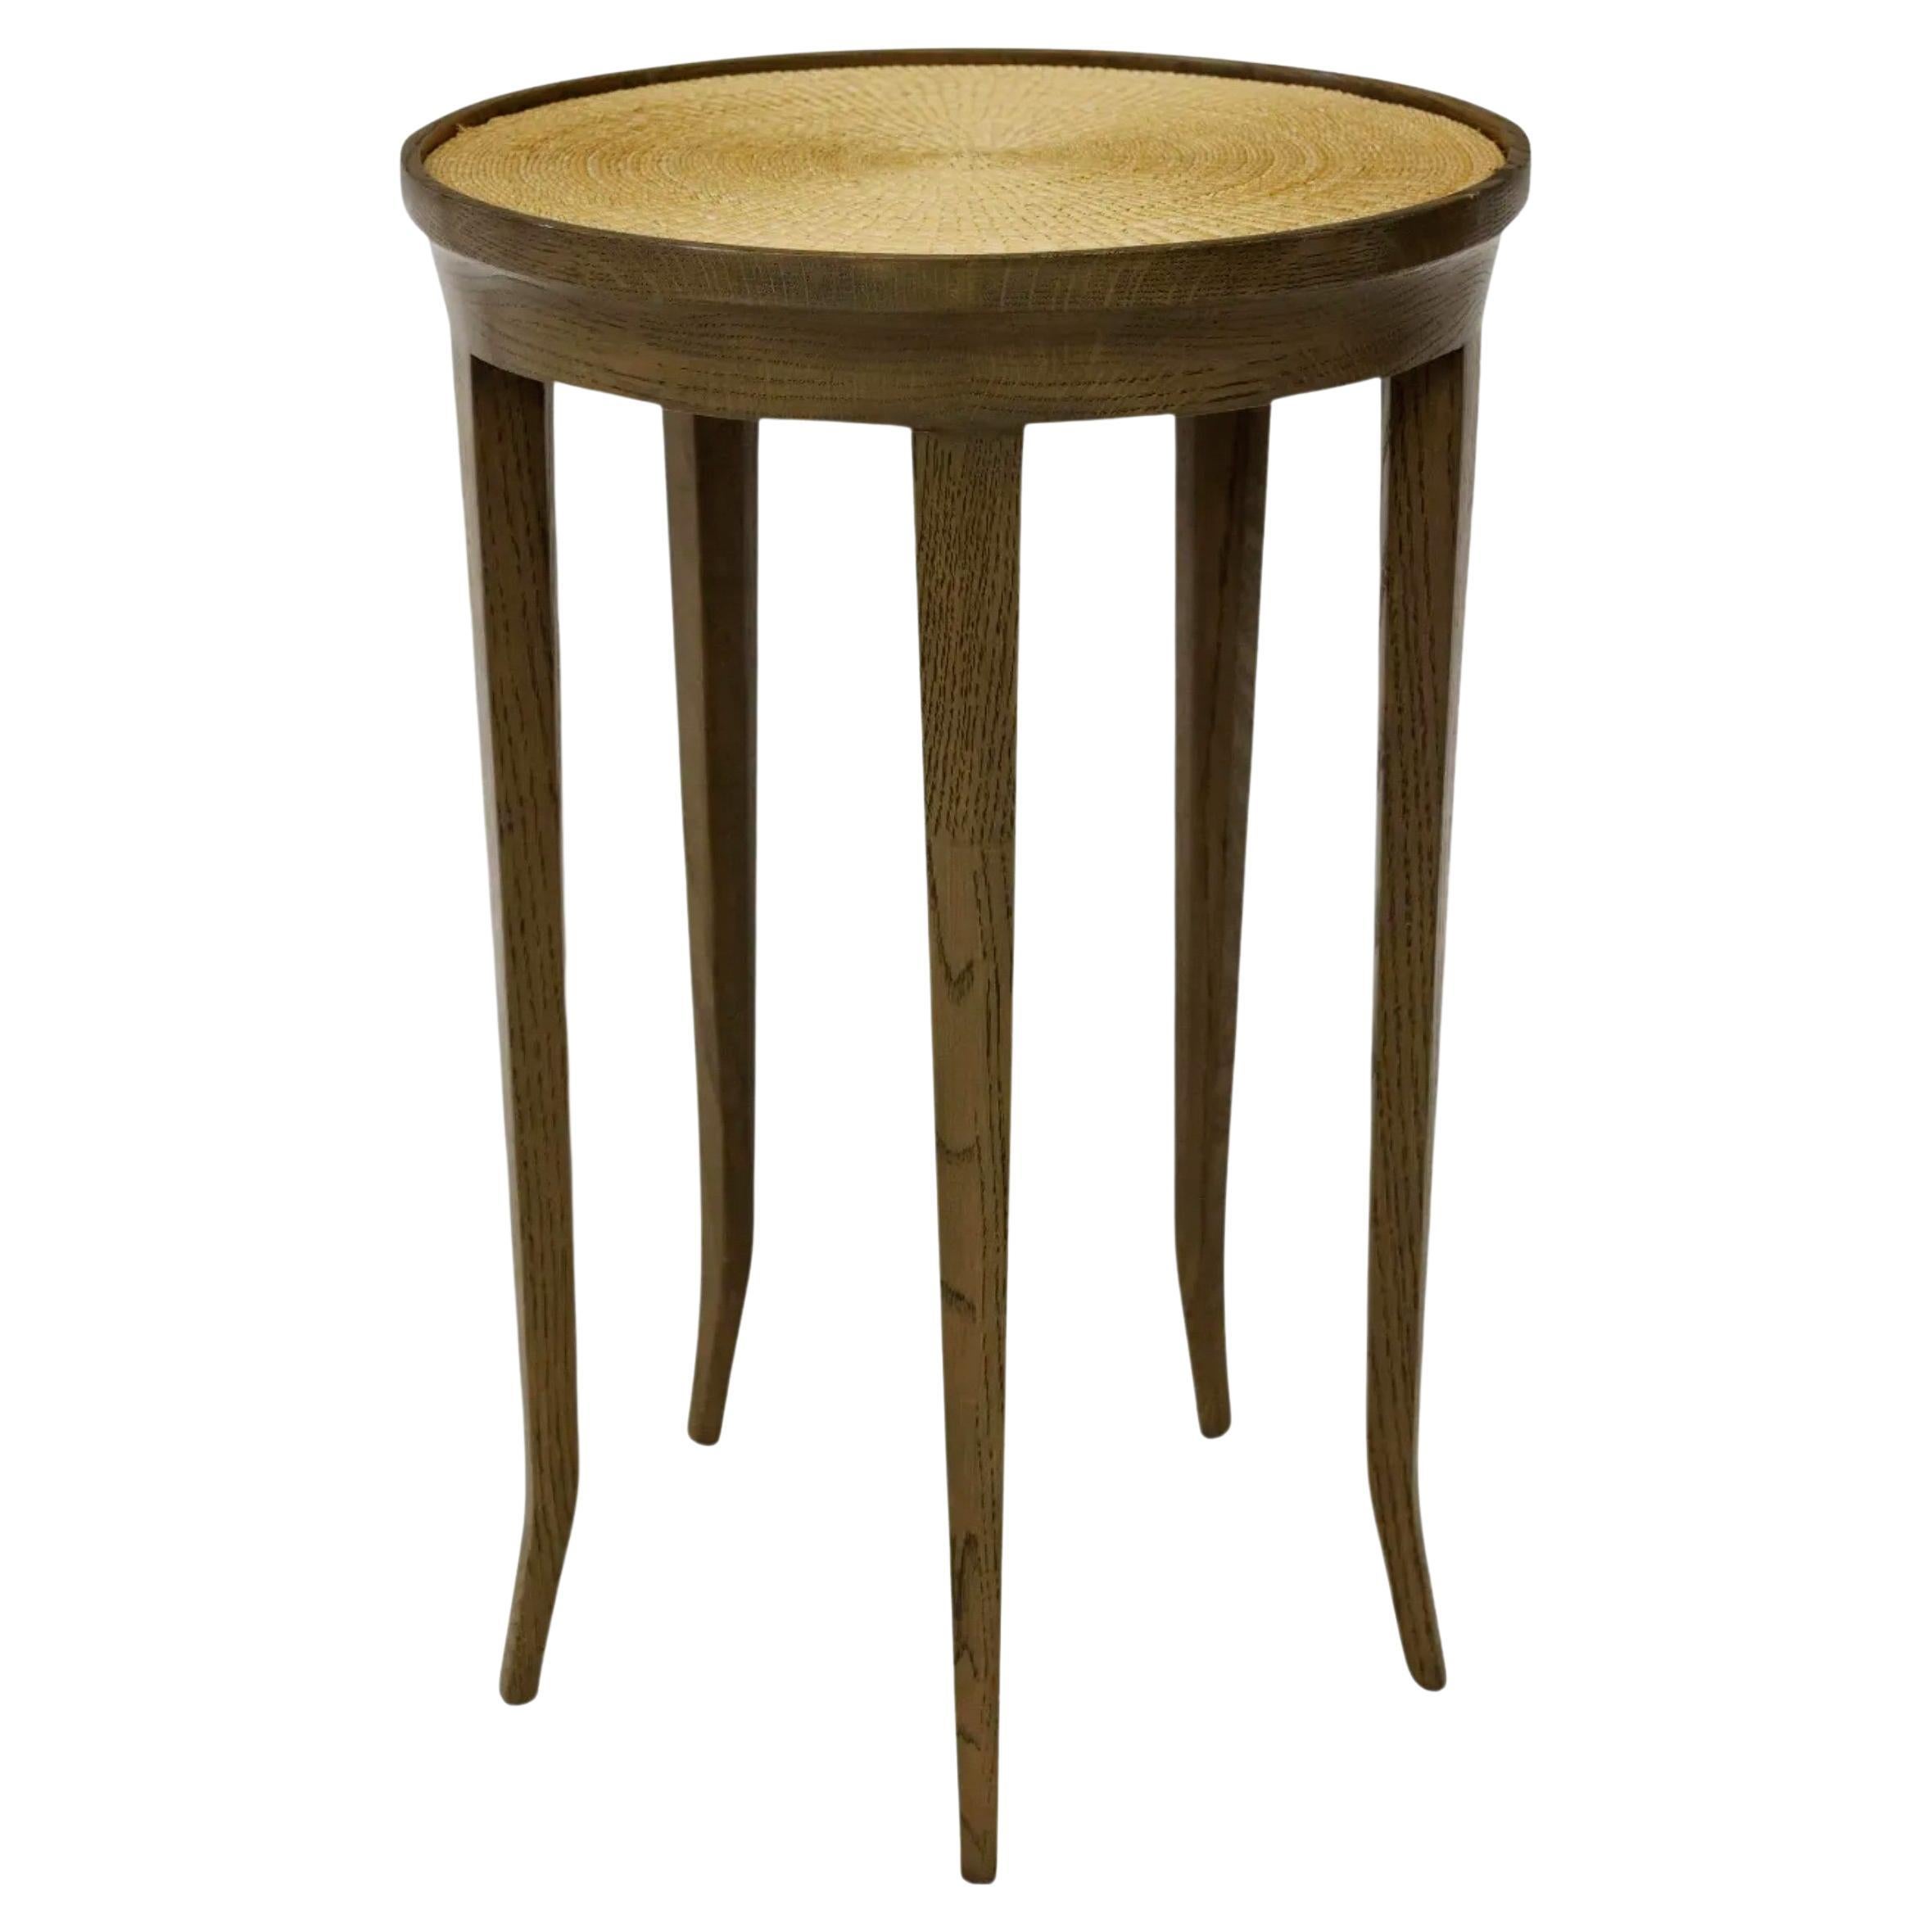 Five Leg Painted Wood & Wicker Occasional Table